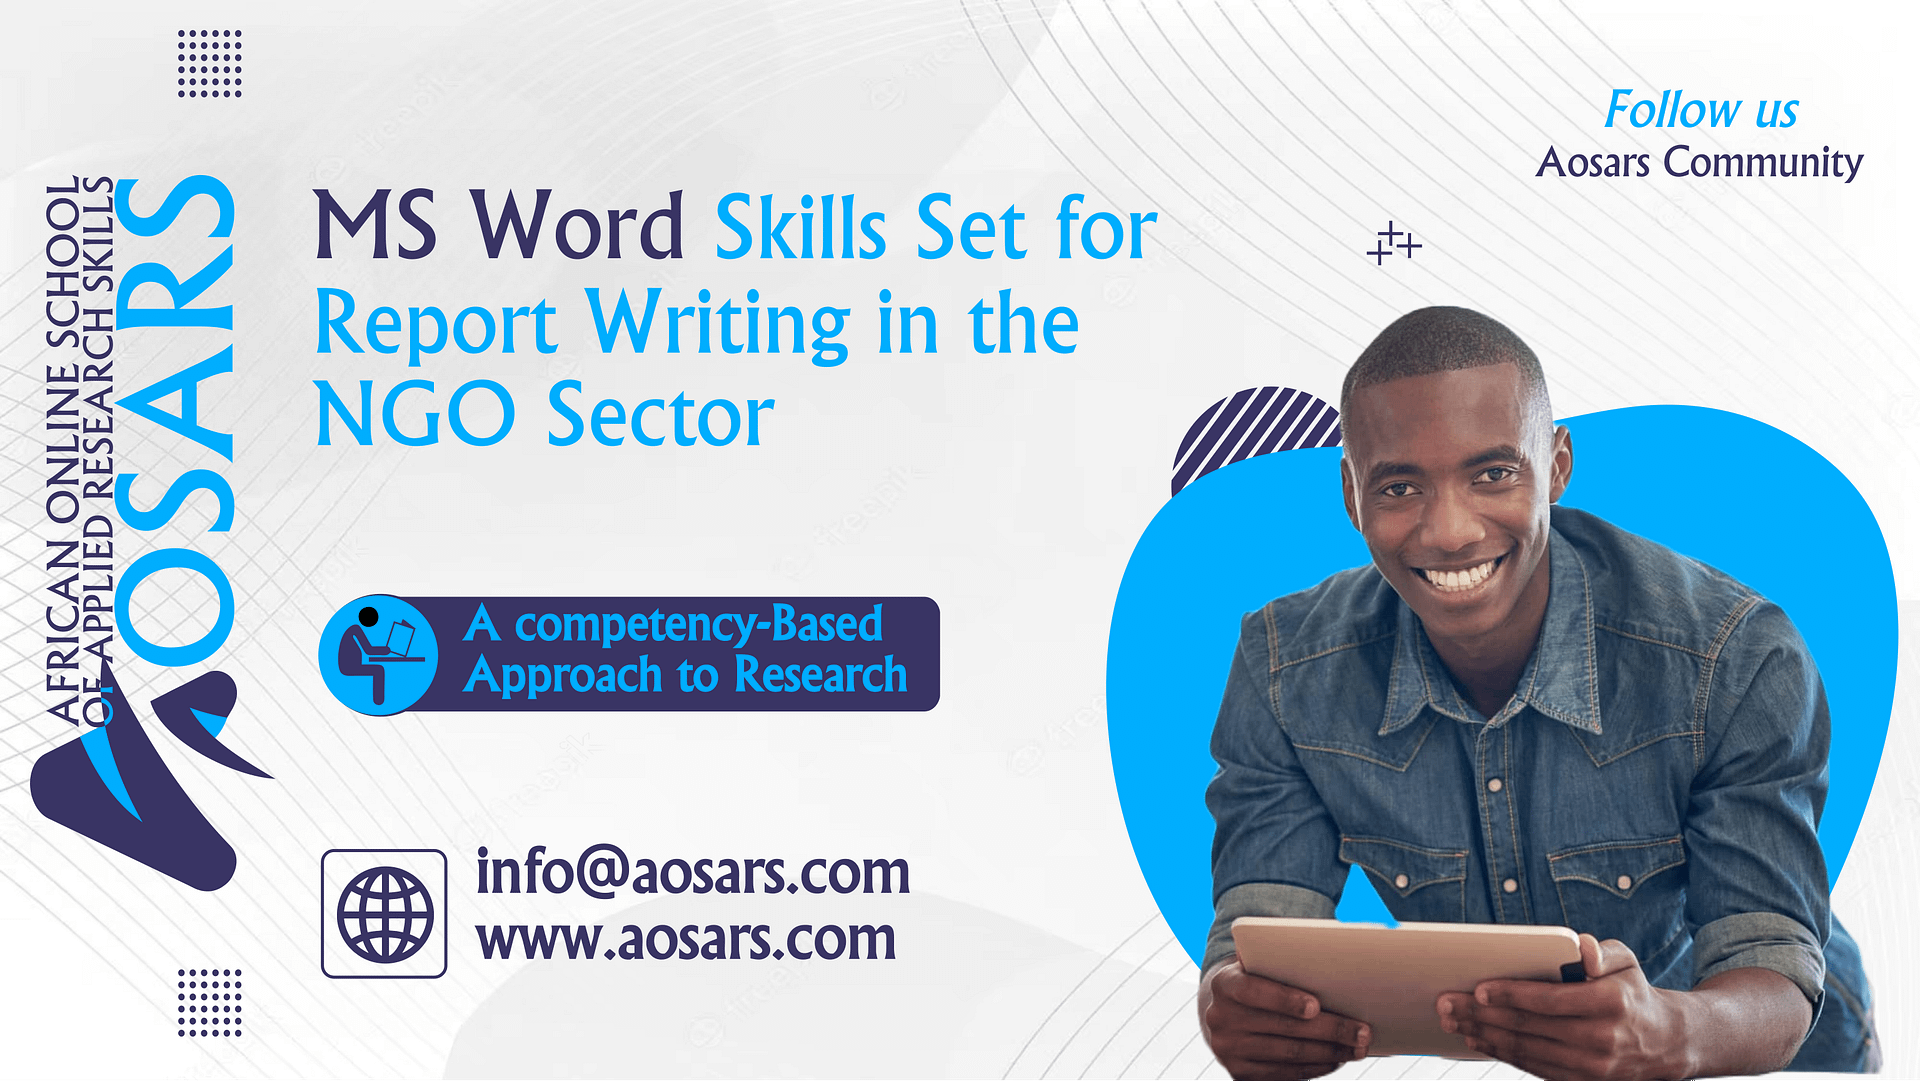 MS Word Skills Set for Report Writing in the NGO Sector